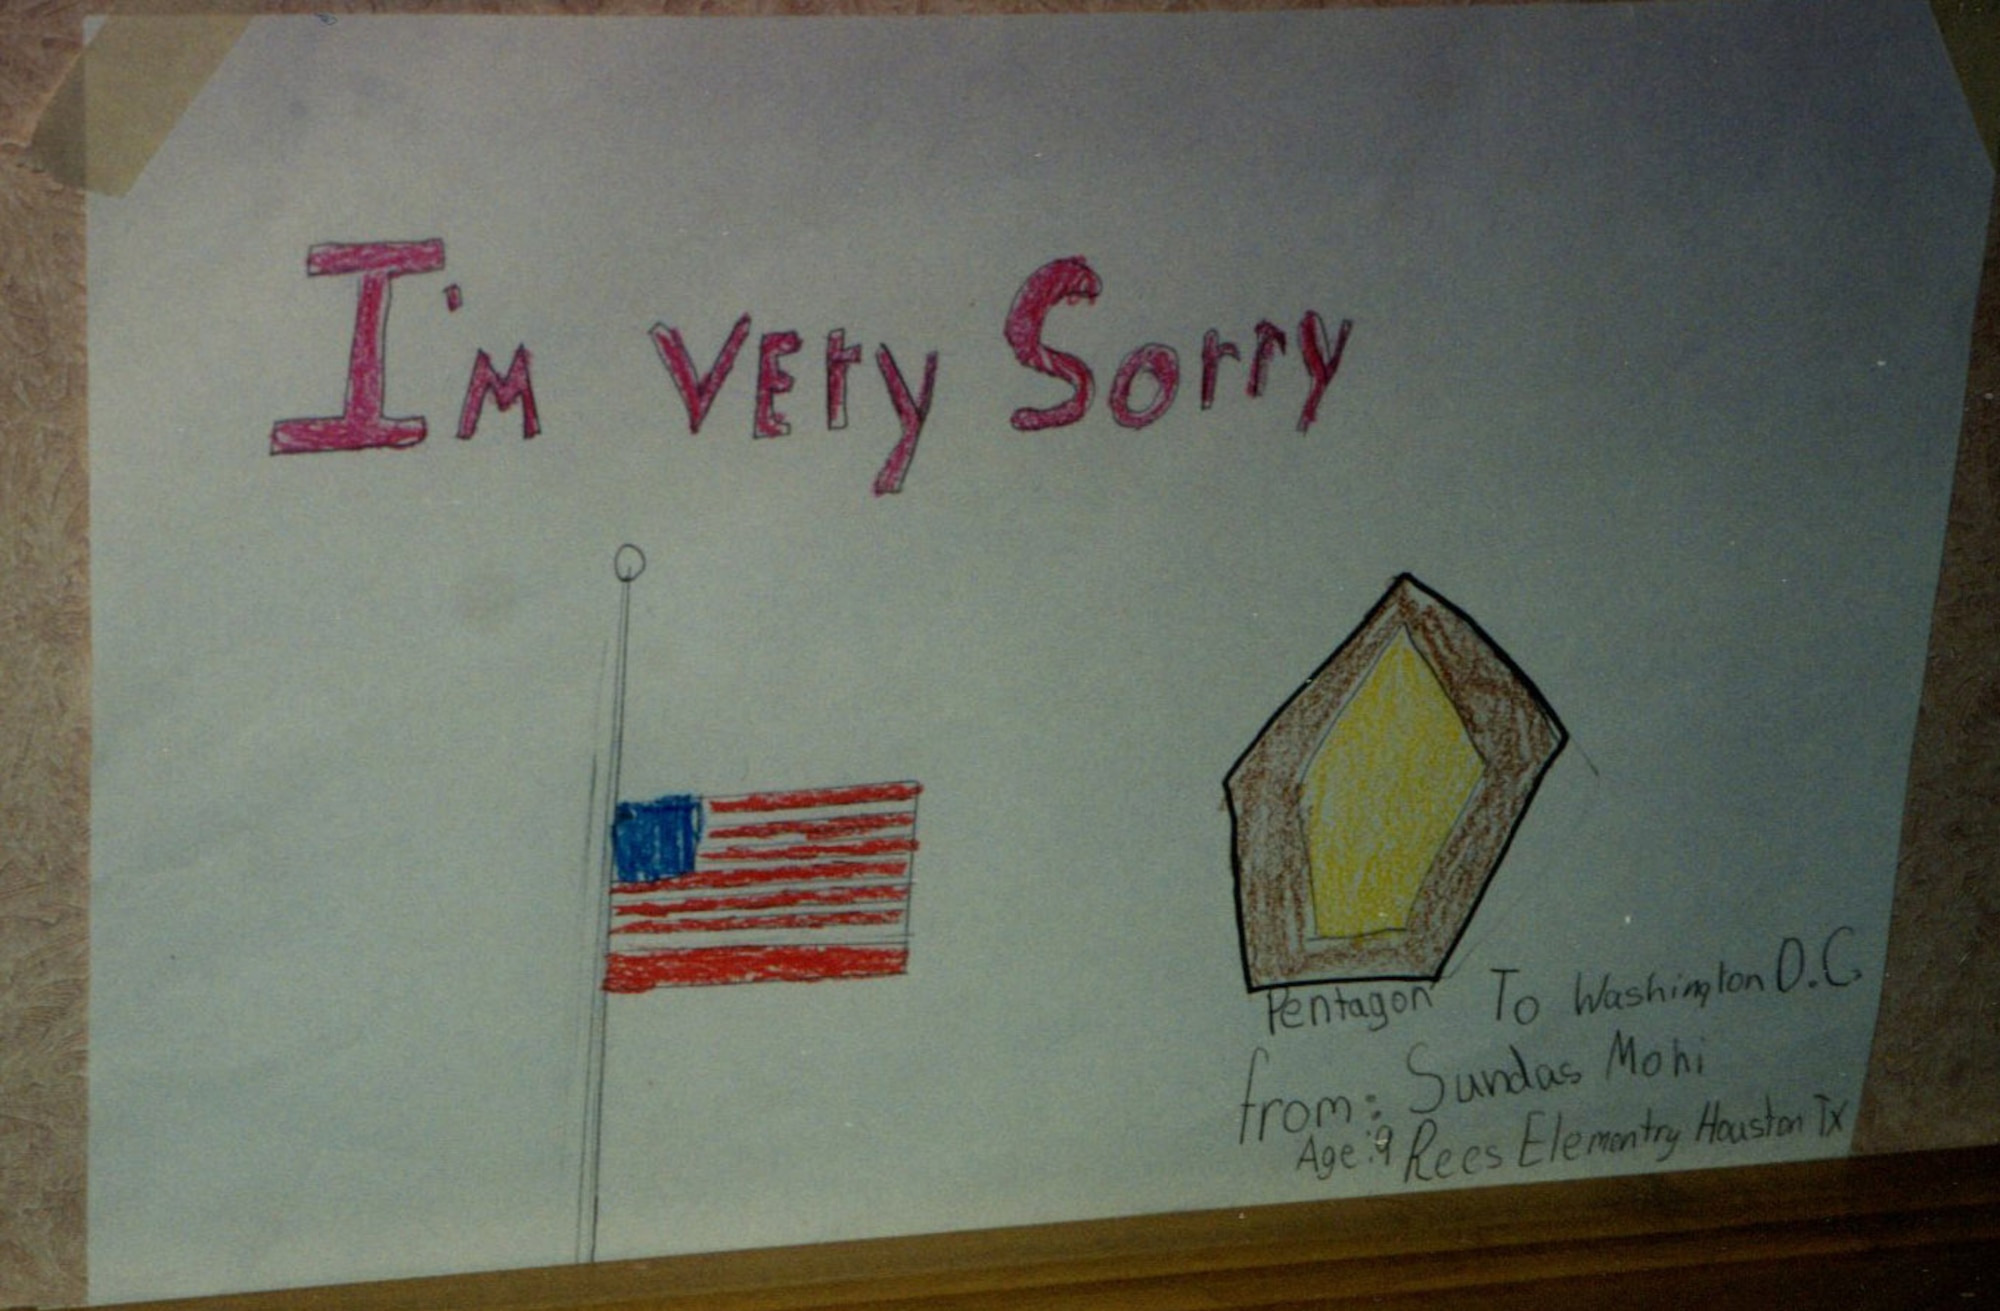 In a show of support, an untold number of letters from across the country poured into the Pentagon in the weeks and months following the 9/11 attack there. Many of the letters and drawings, such as the one pictured, were displayed at the memorial service held at the Pentagon a month later to honor the 184 people killed in the Sept. 11, 2001, terrorist attack. (Courtesy photo)